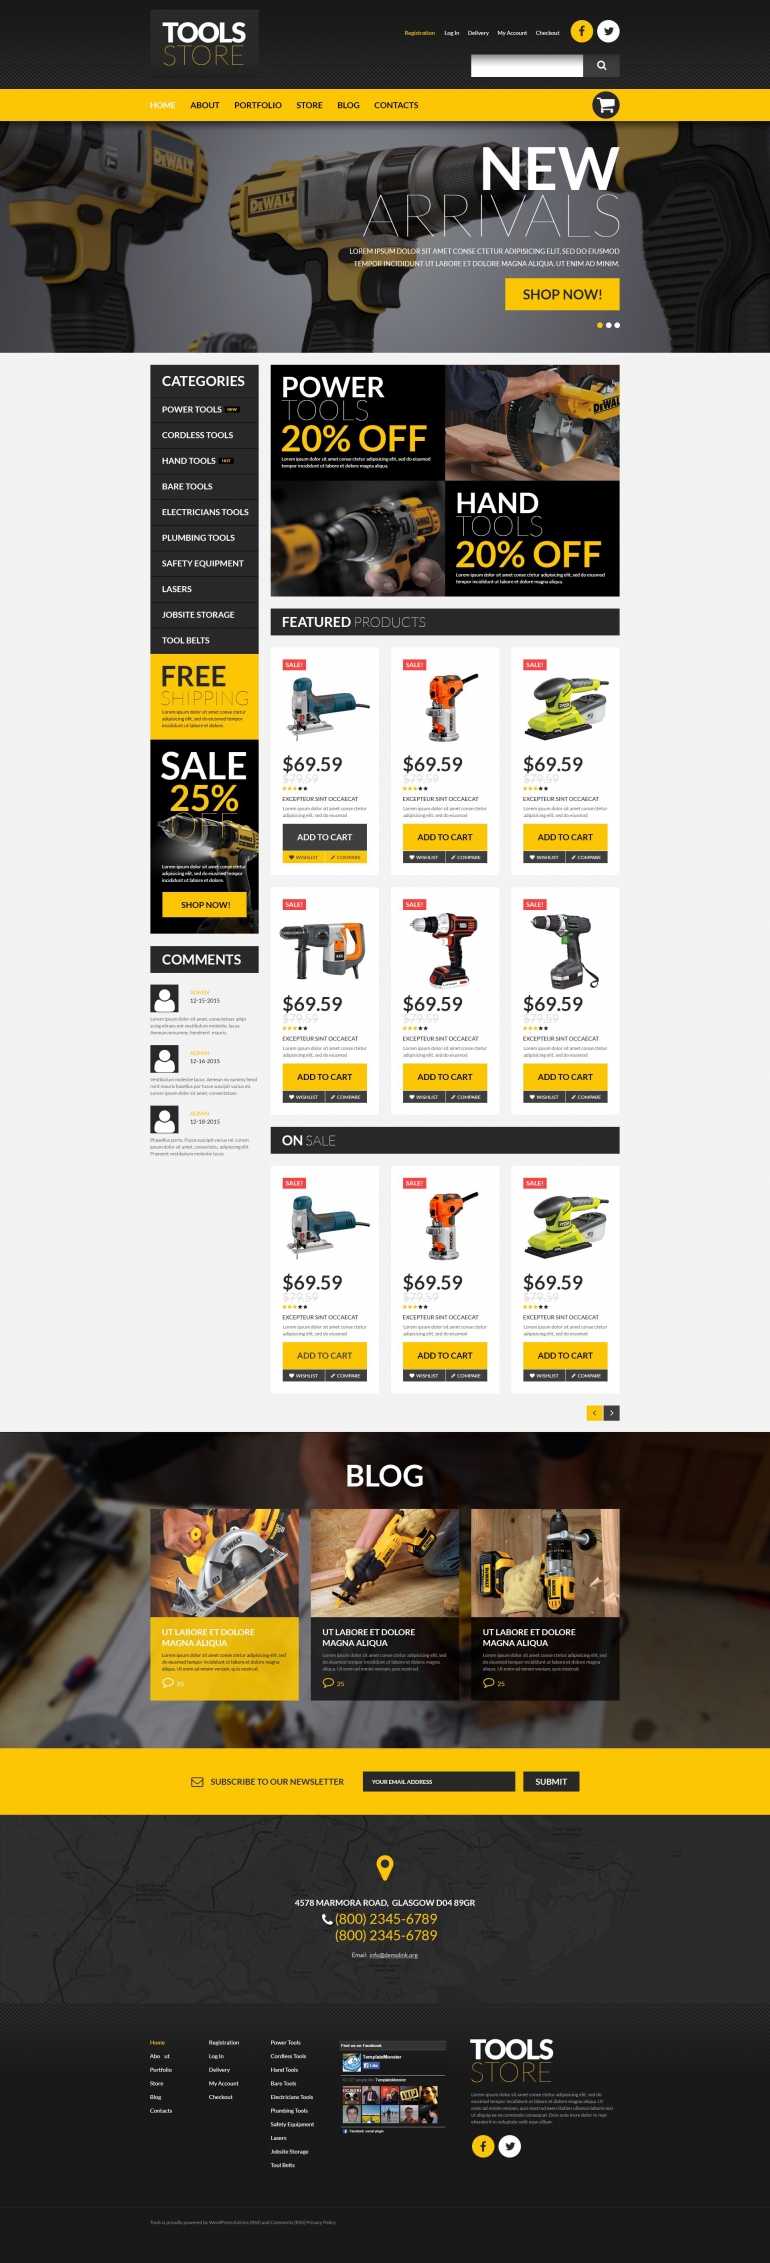 15+ Best WordPress Themes For Your eCommerce Website 16